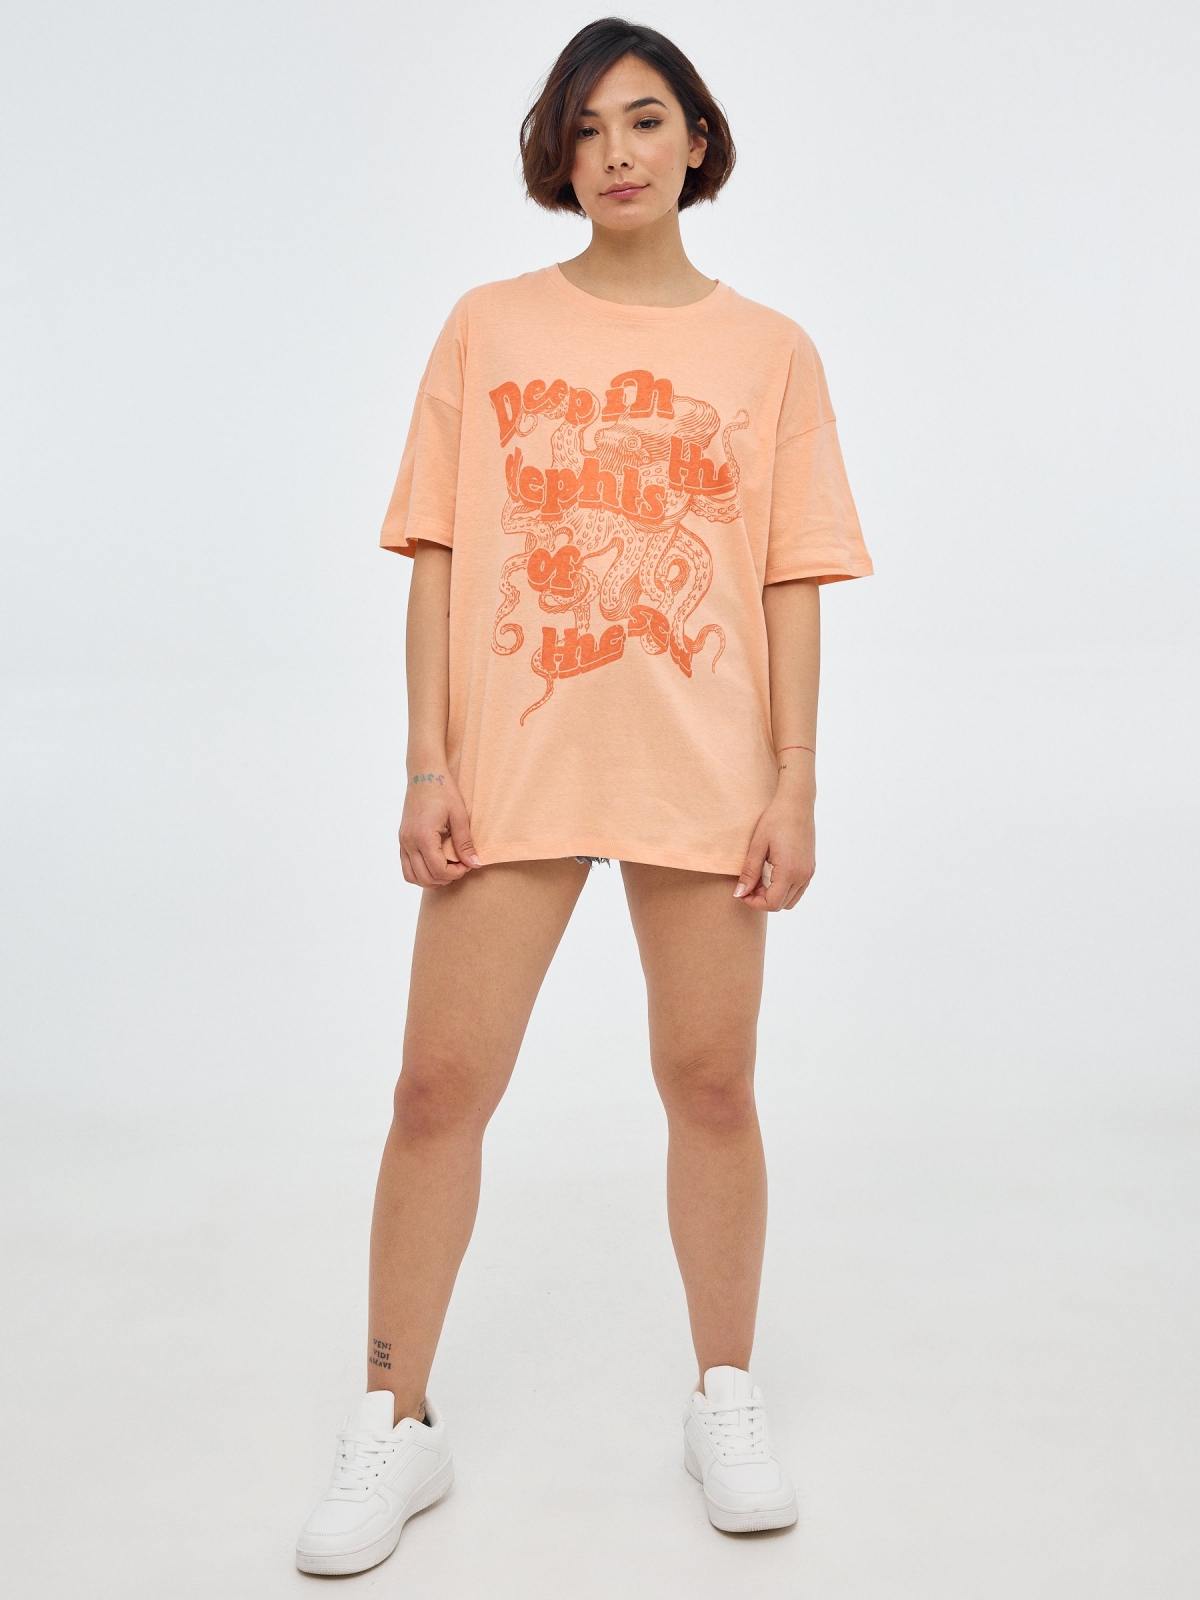 Oversized printed t-shirt peach front view